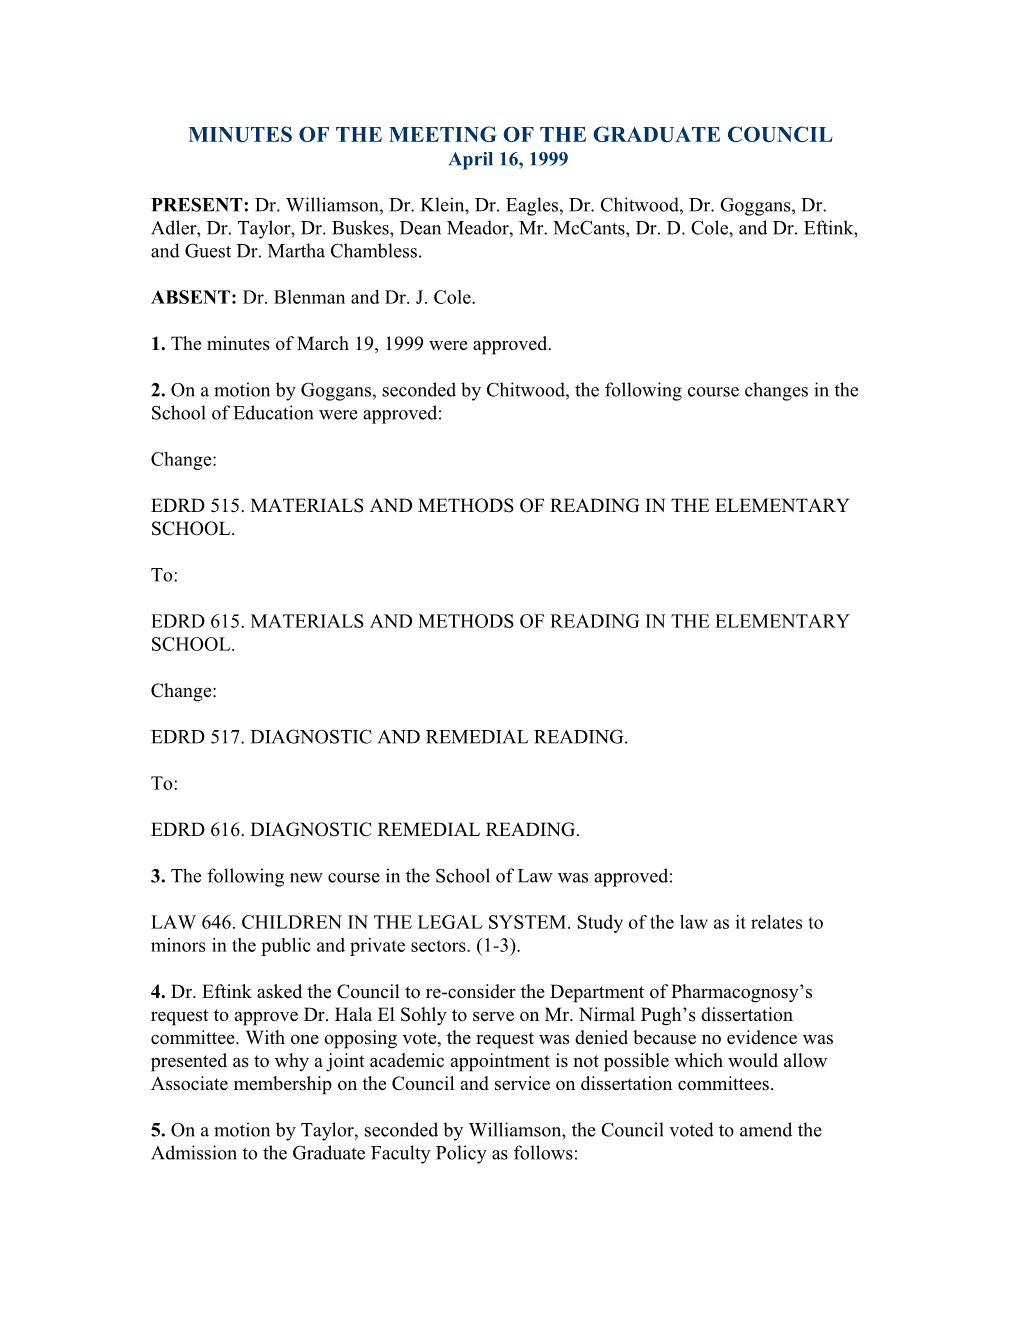 Minutes of the Meeting of the Graduate Council